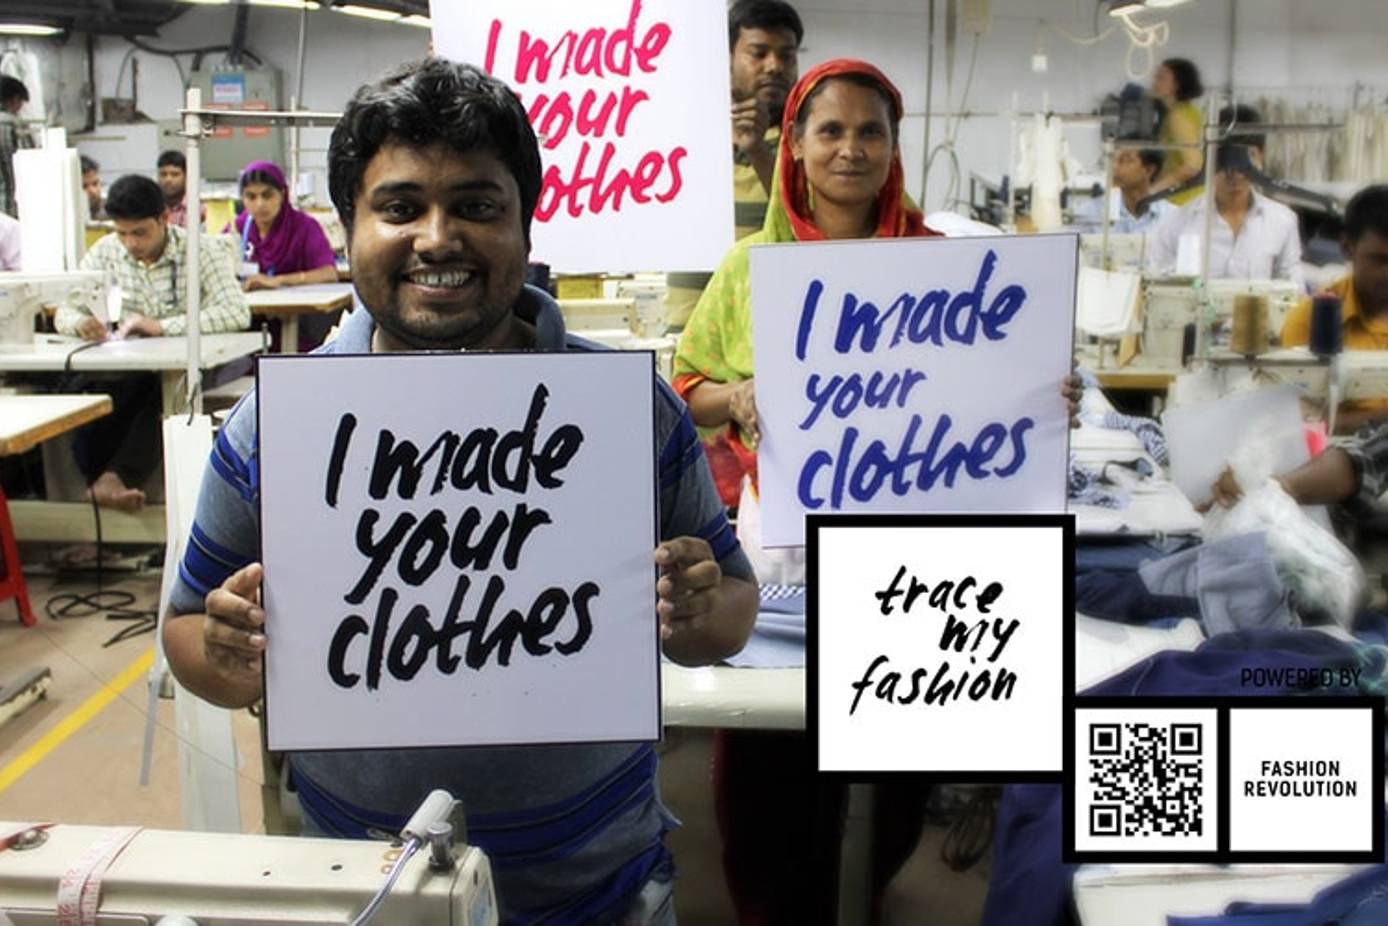 FashionRevolution: Time to Trace Fashion by asking Who Made My Clothes?